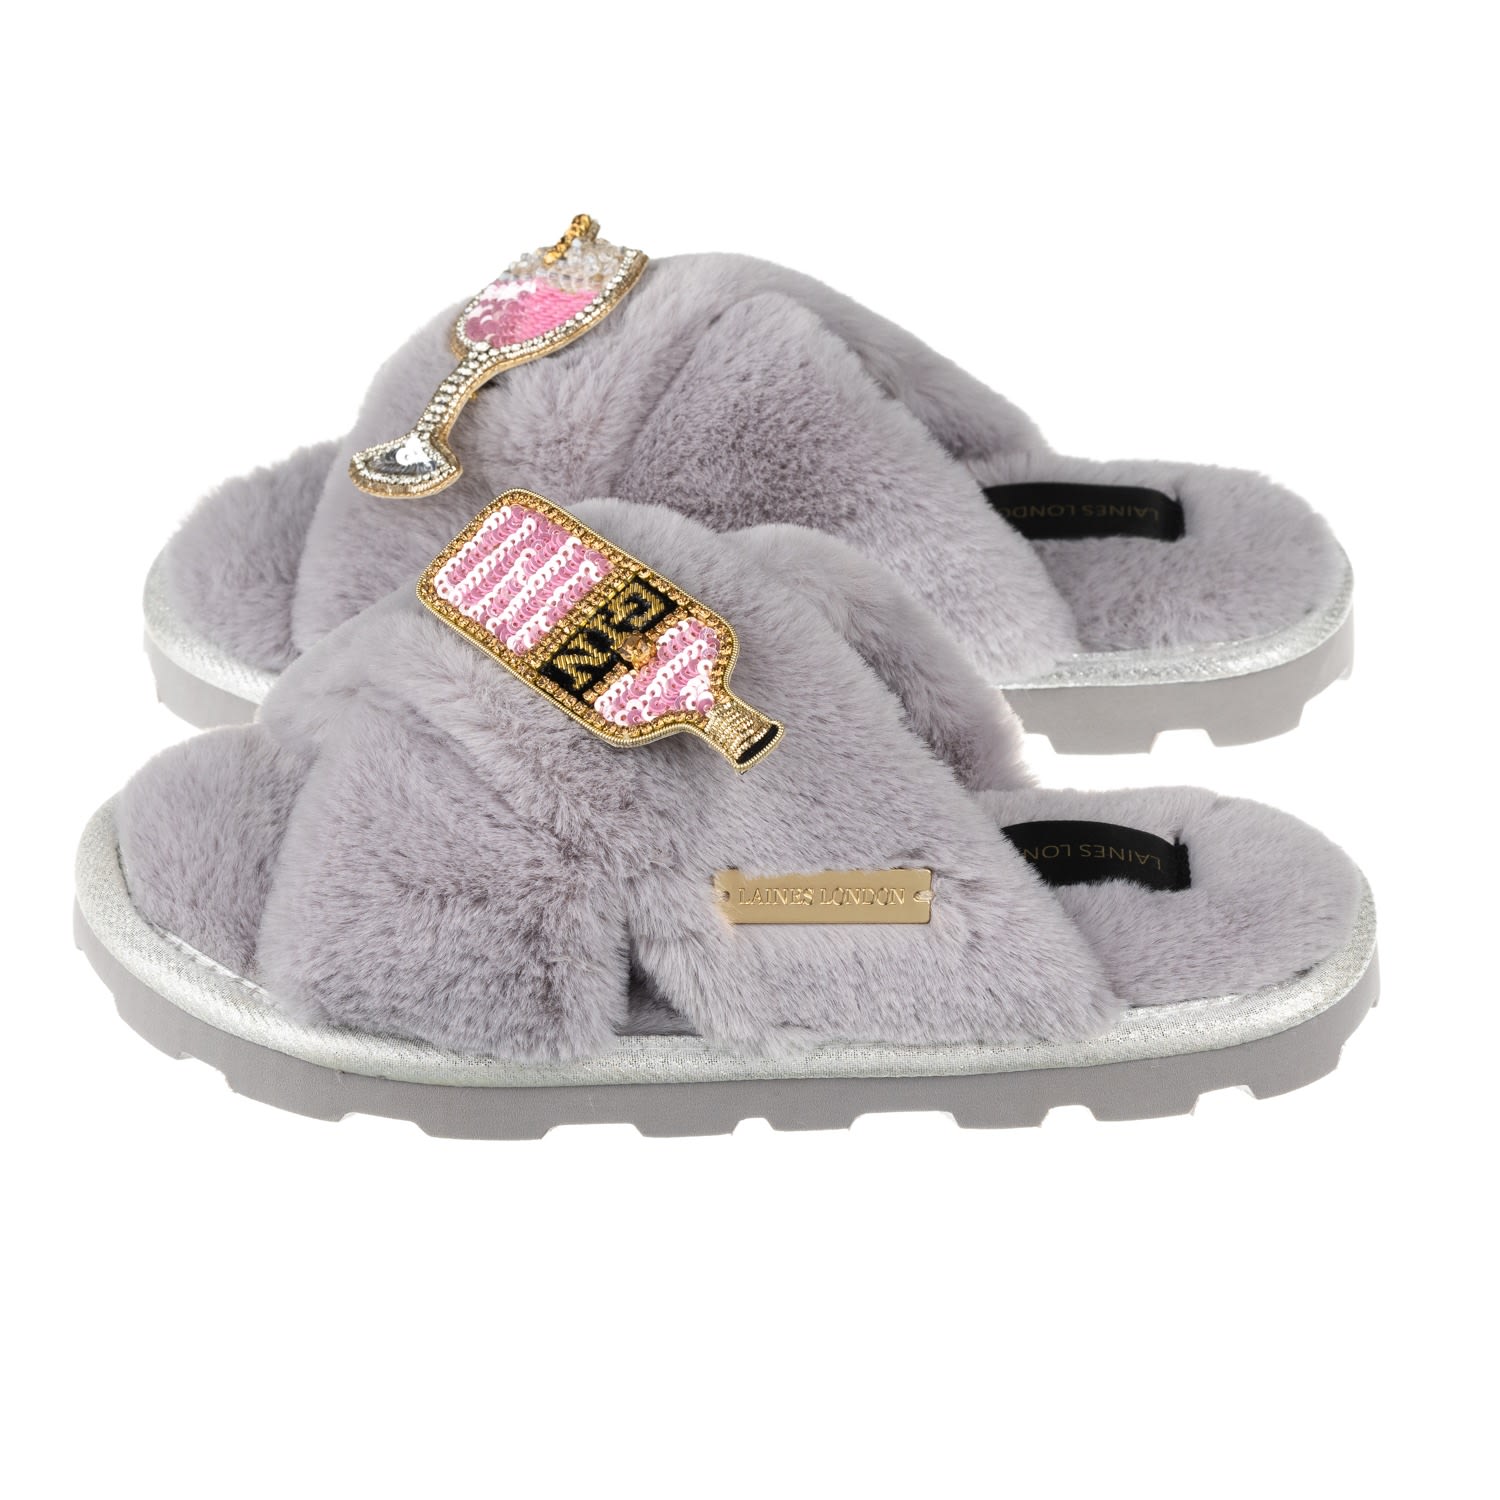 Women’s Ultralight Chic Laines Slipper Sliders With Pink Gin Brooches - Grey Large Laines London